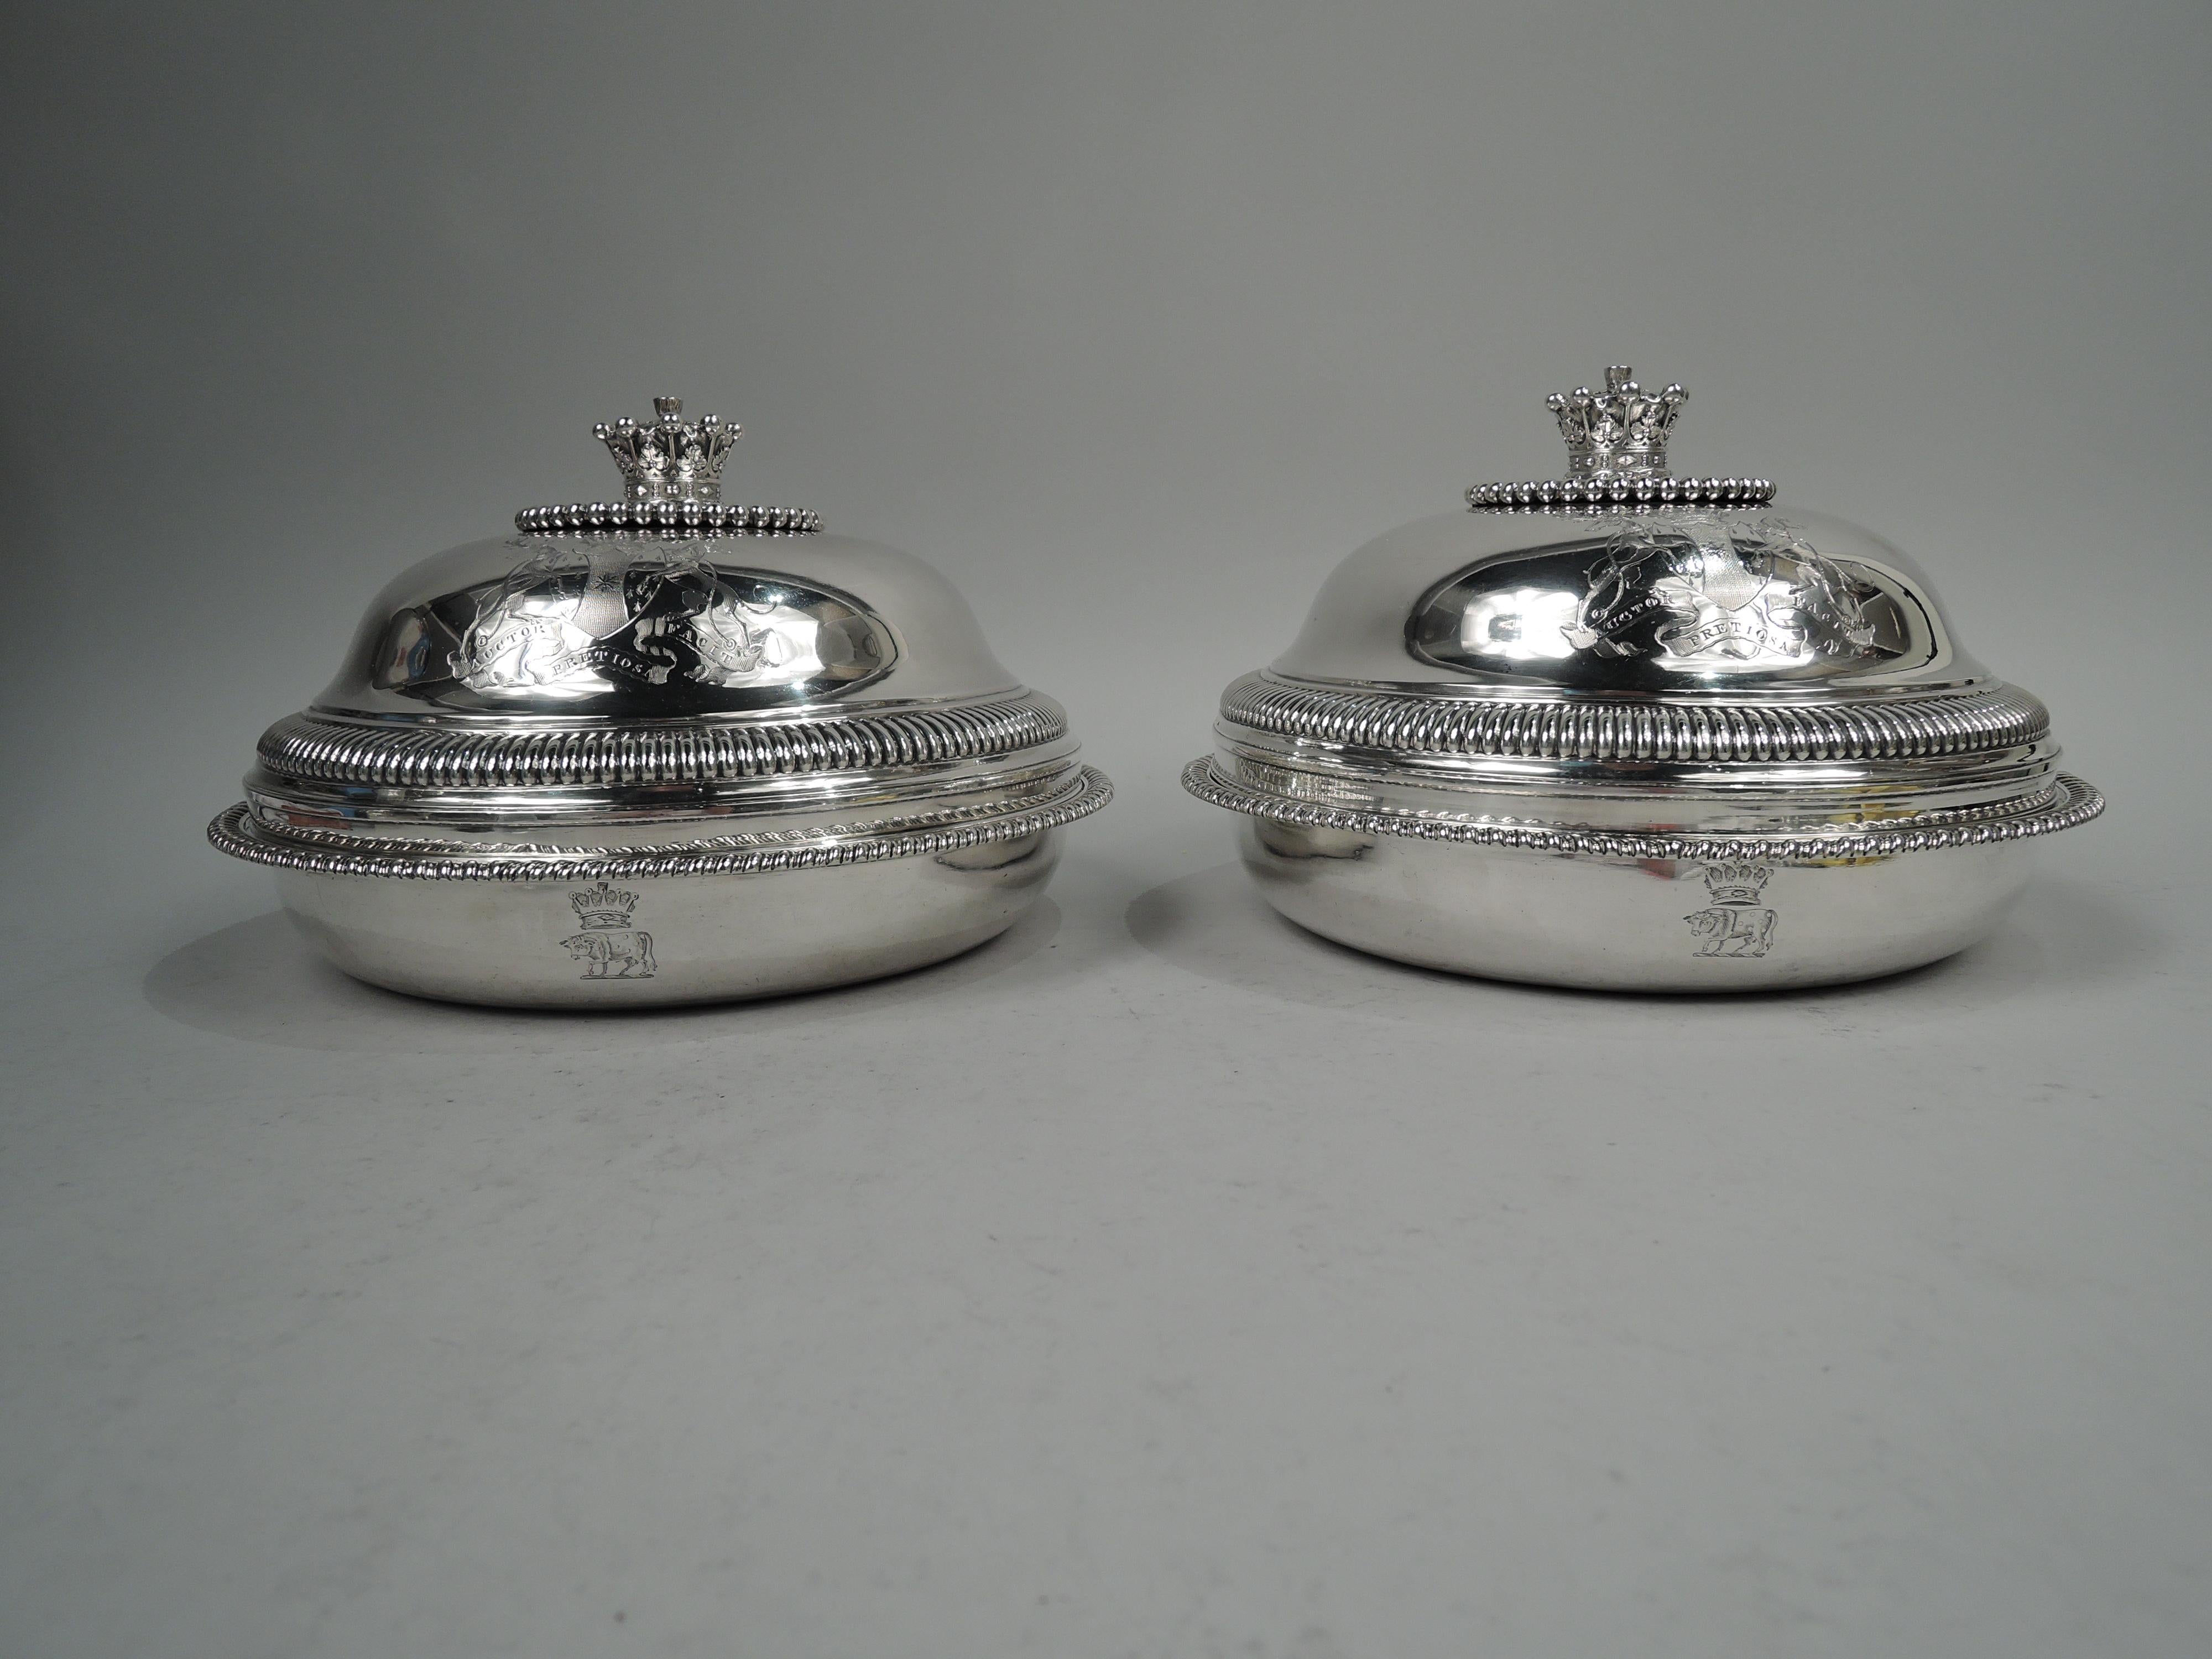 Pair of George III sterling silver covered vegetable dishes. Made by Paul Storr in London in 1805. Each: Tapering bowl with gadrooned rim. Cover domed with lobed shoulder; cast coronet finial mounted to round disc with beaded border. Engraved coat